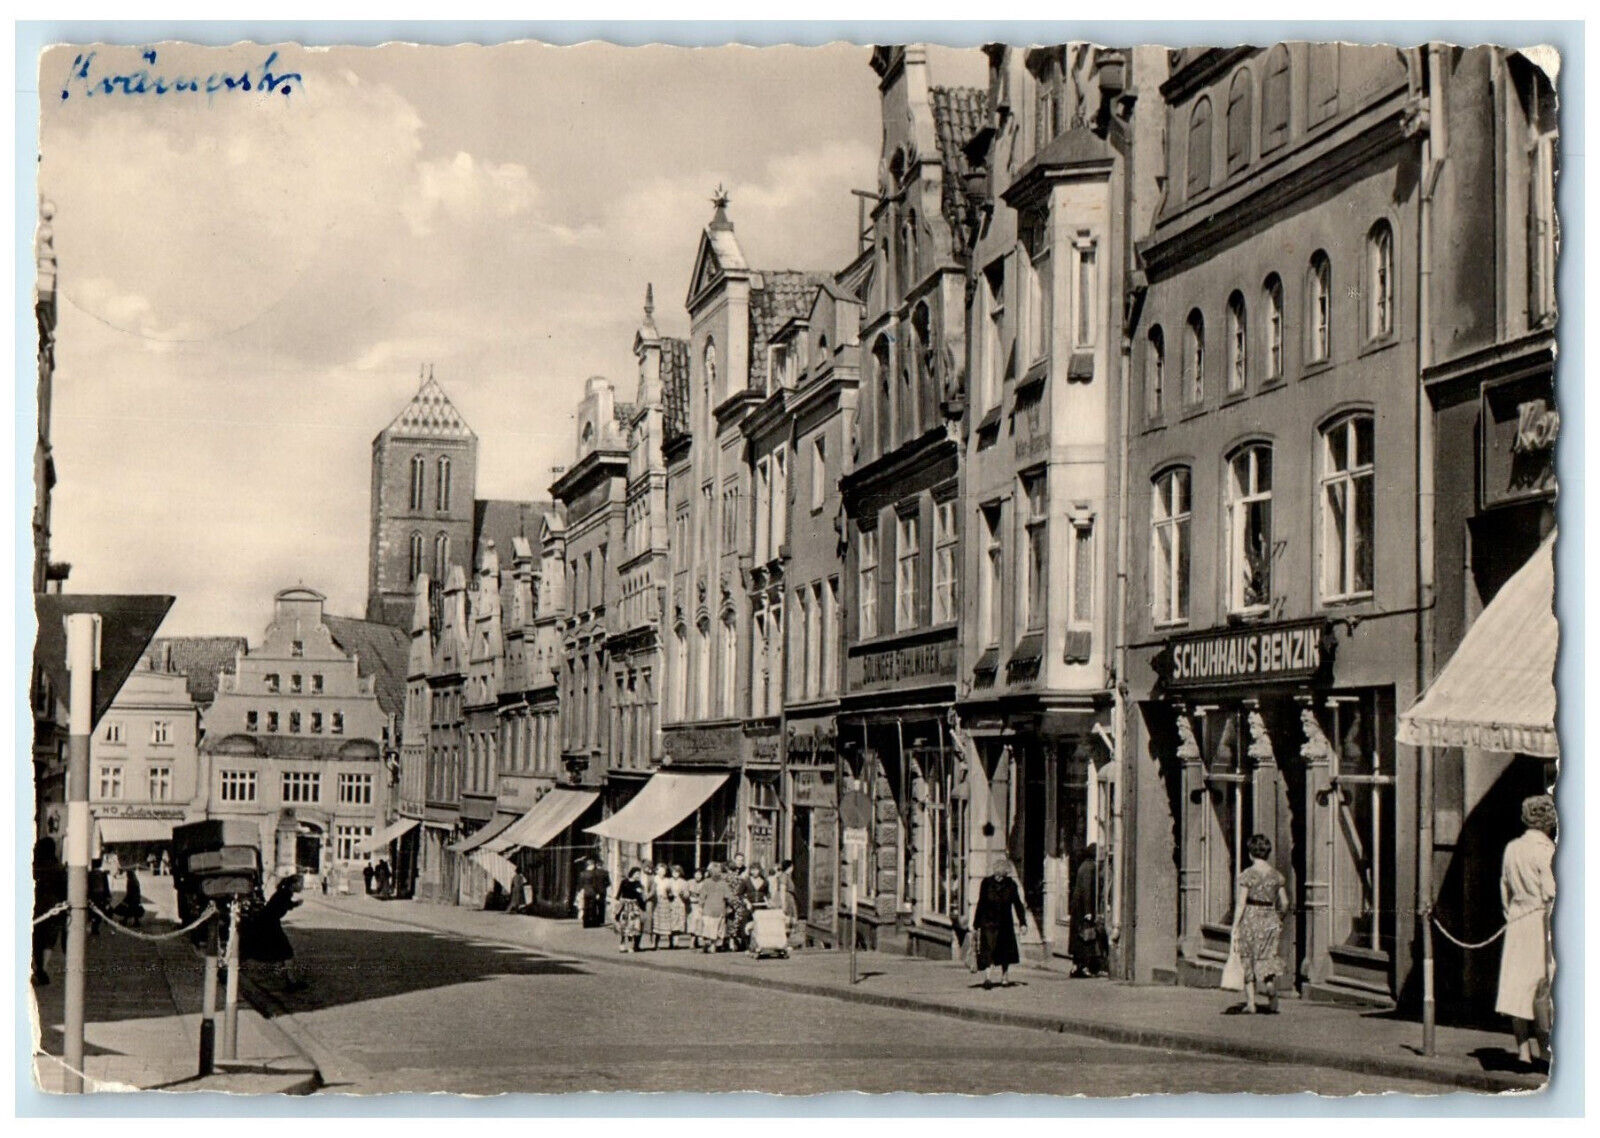 1959 Business Section Wismar Mecklenburg Germany Posted RPPC Photo Postcard